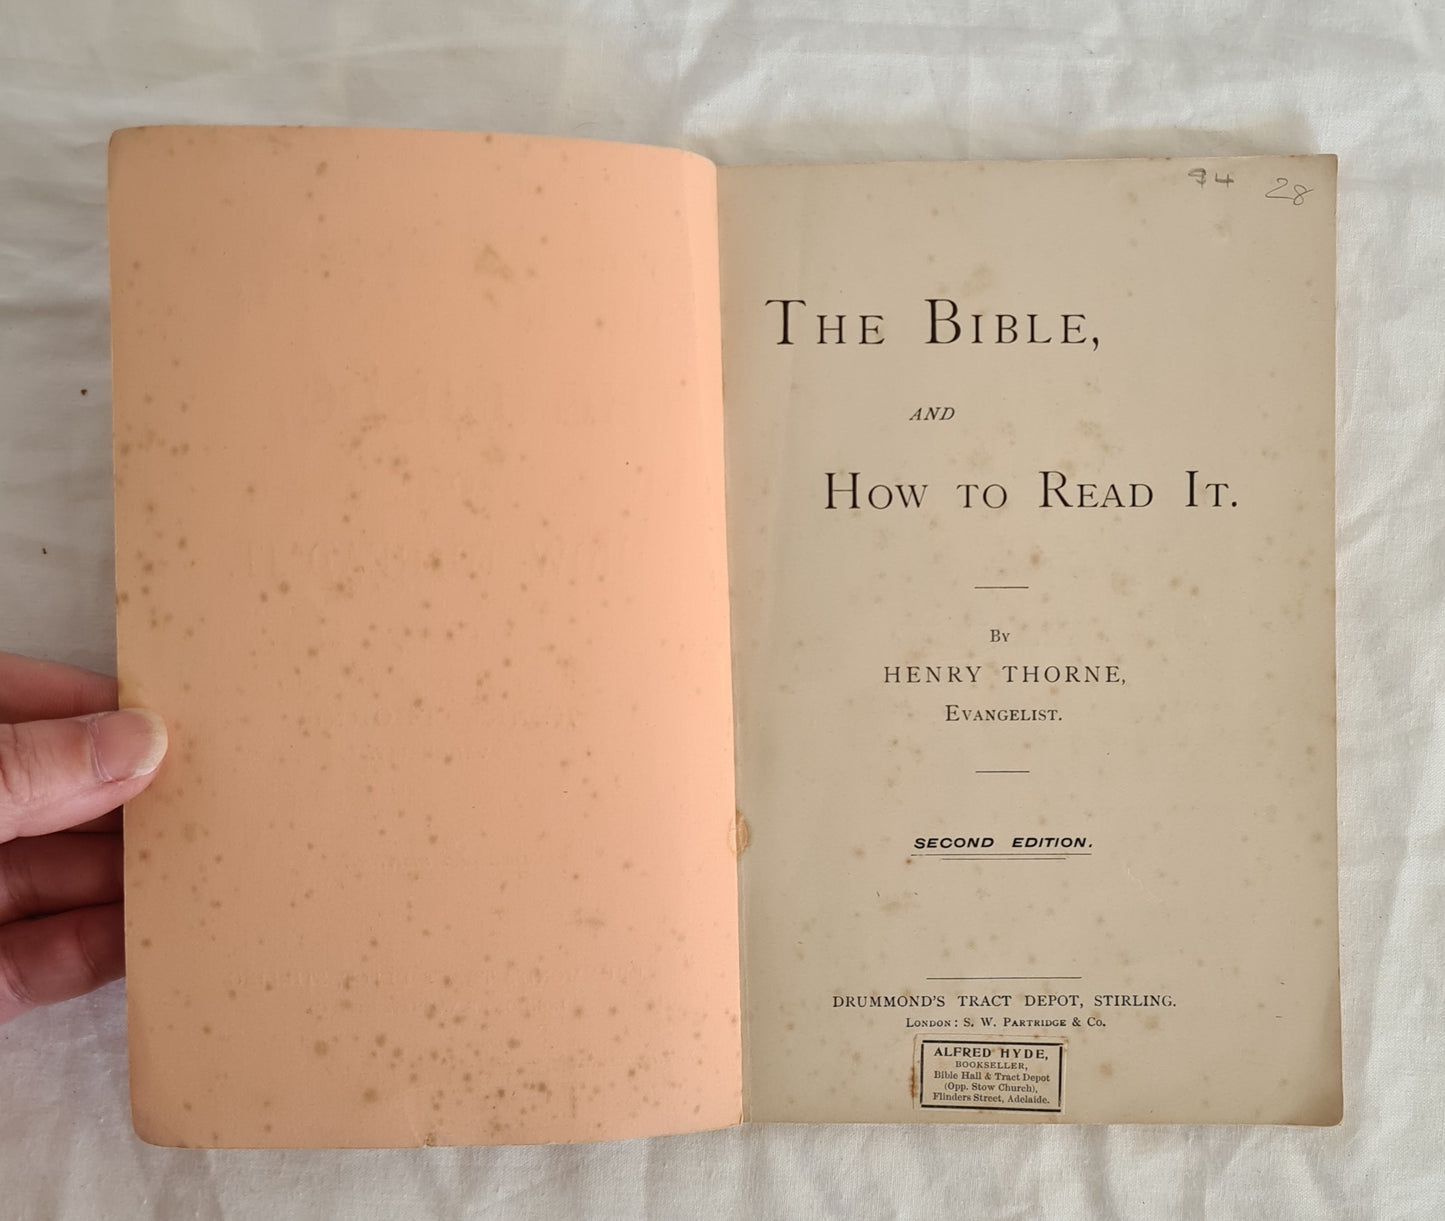 The Bible and How to Read It by Henry Thorne